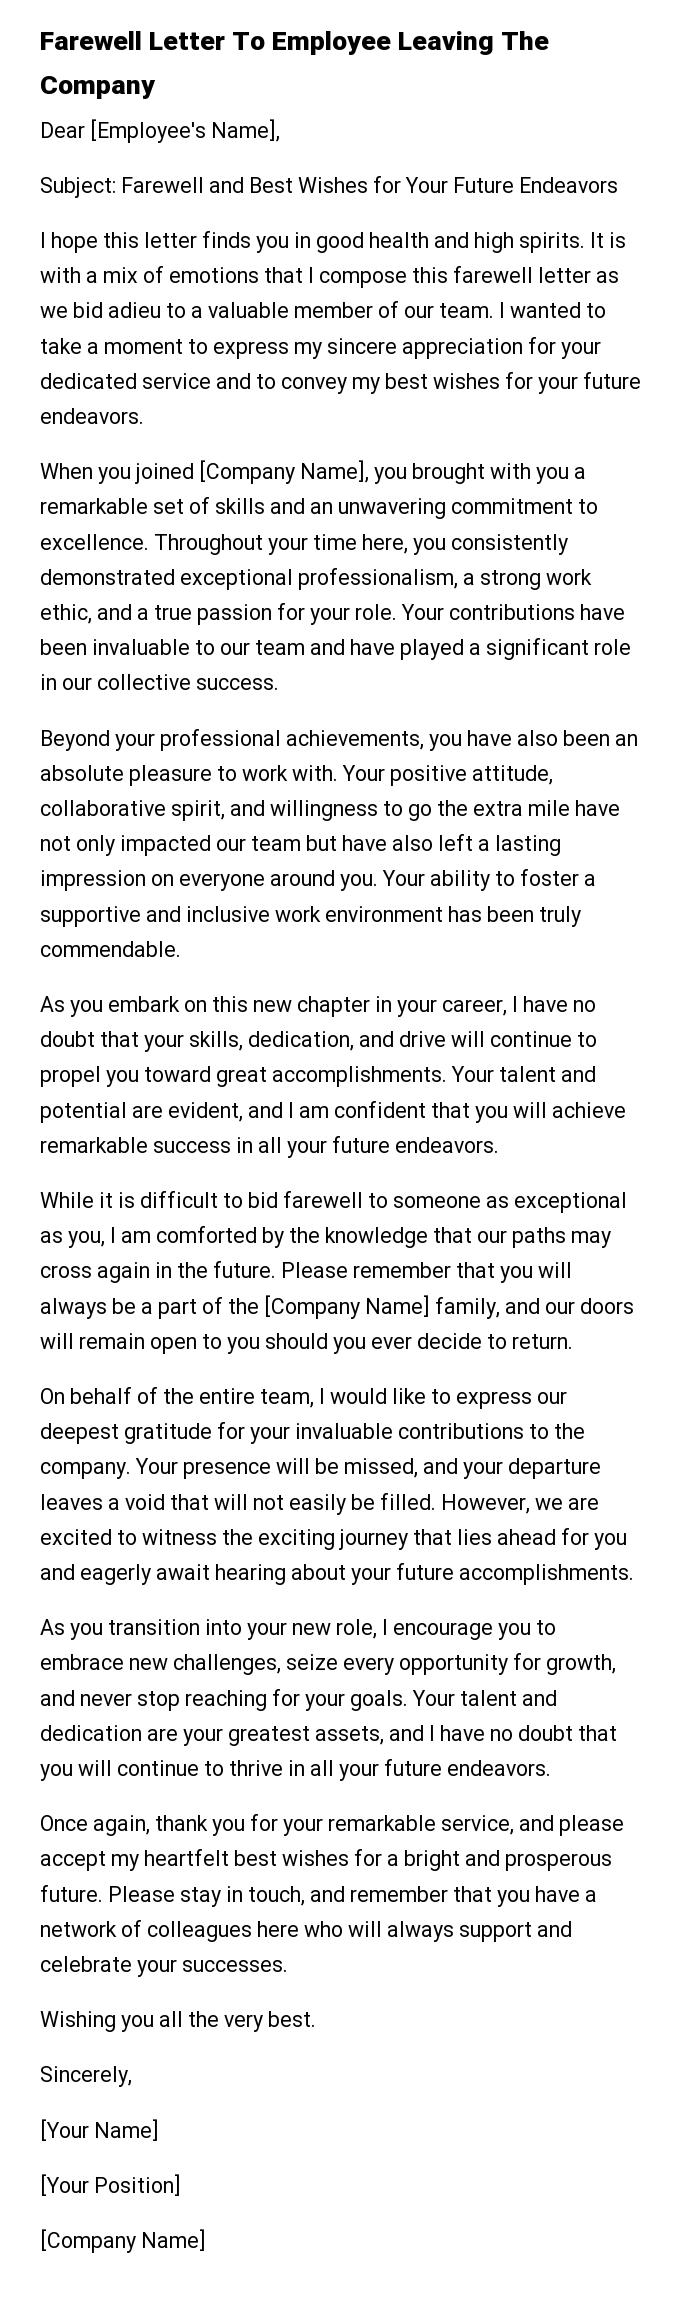 Farewell Letter To Employee Leaving The Company